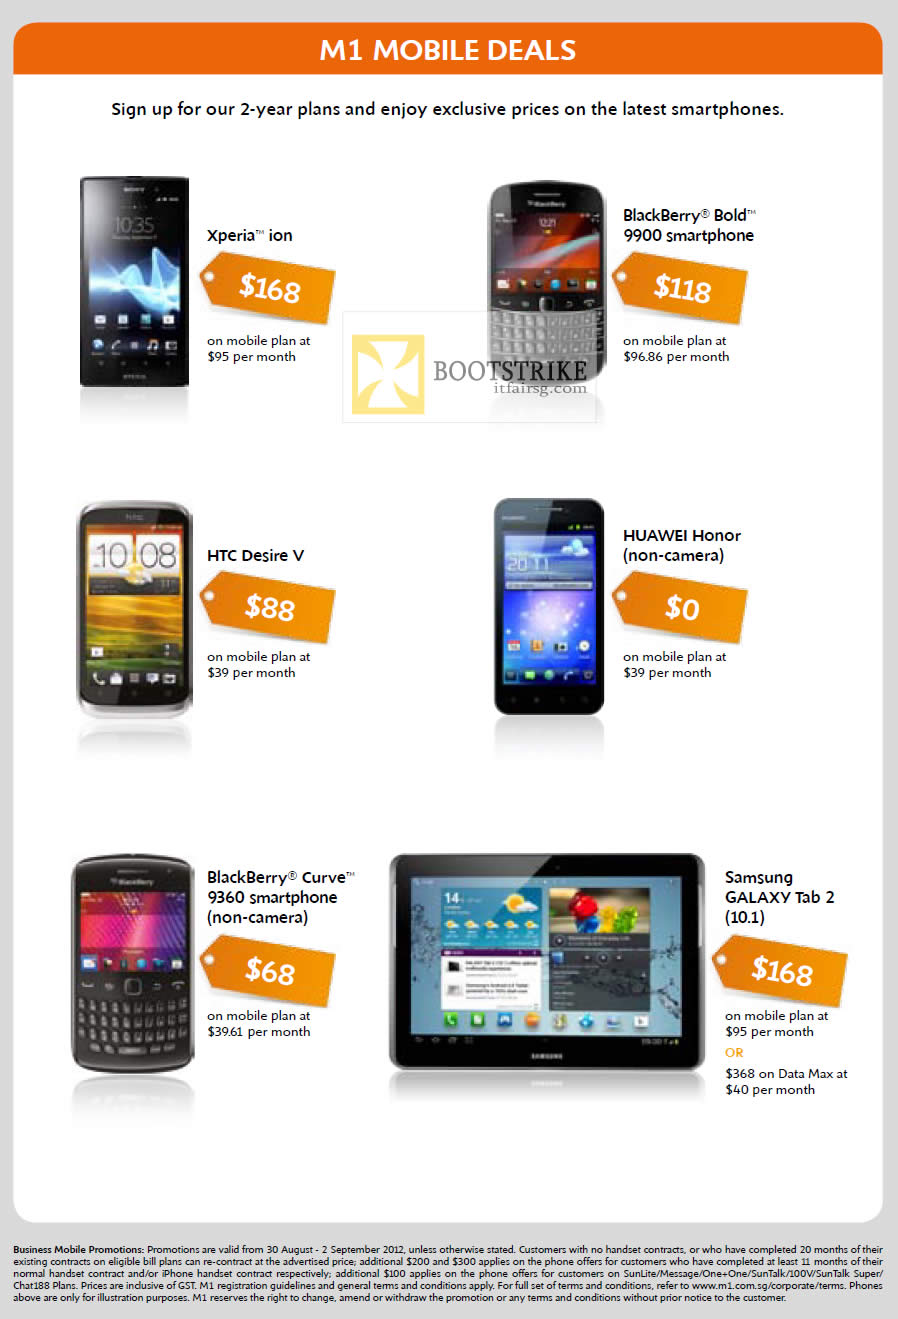 COMEX 2012 price list image brochure of M1 Business Sony Xperia Ion, Samsung Galaxy Tab 2, Blackberry Bold 9900, Curve 9360, Huawei Honor, HTC Desire V